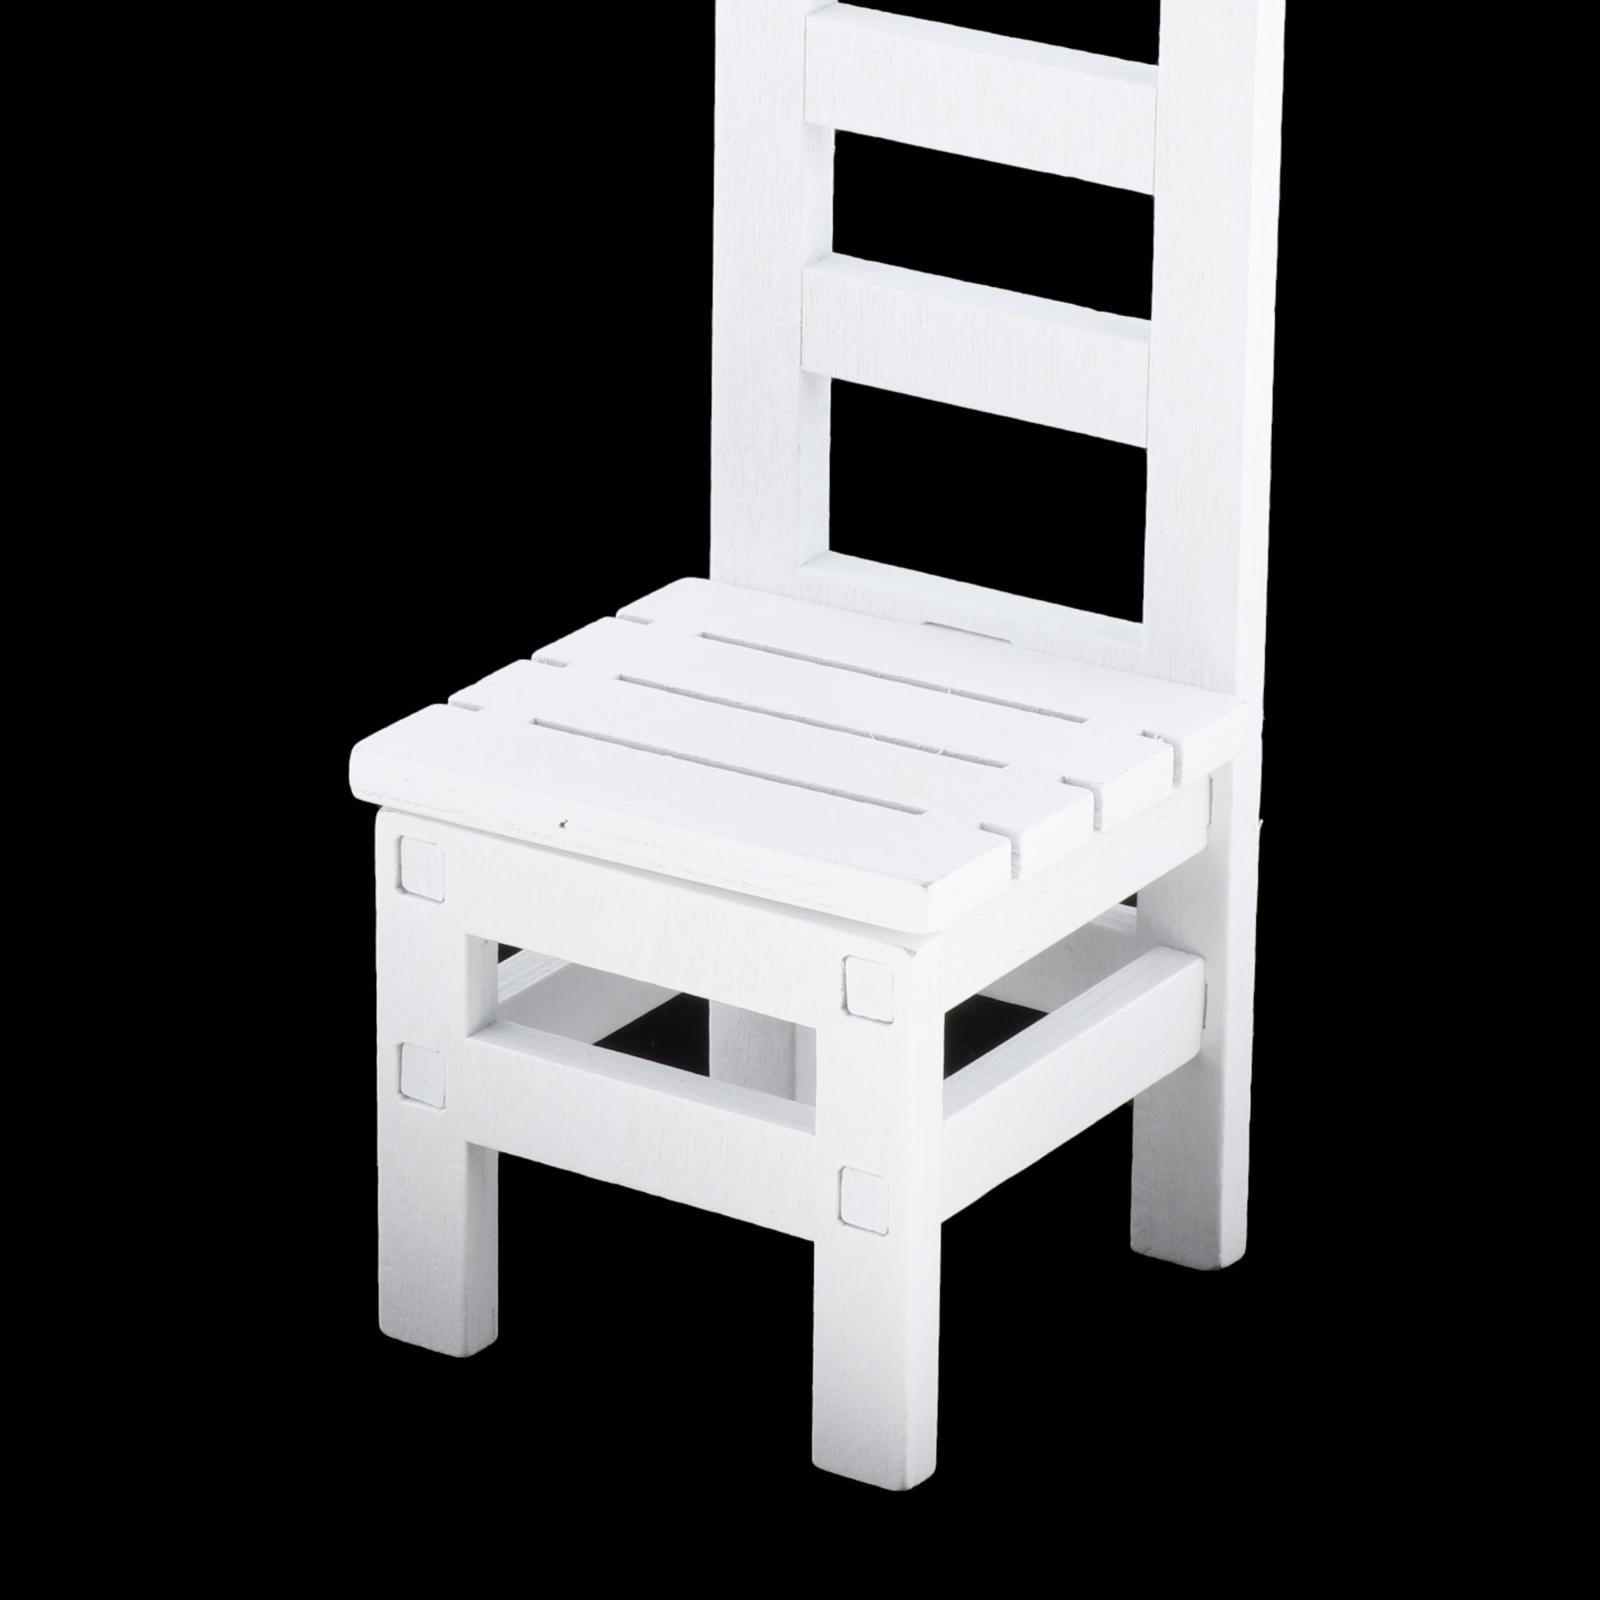 1/6 Scale Furniture for 12" Action Figures Miniature Furniture Chair White